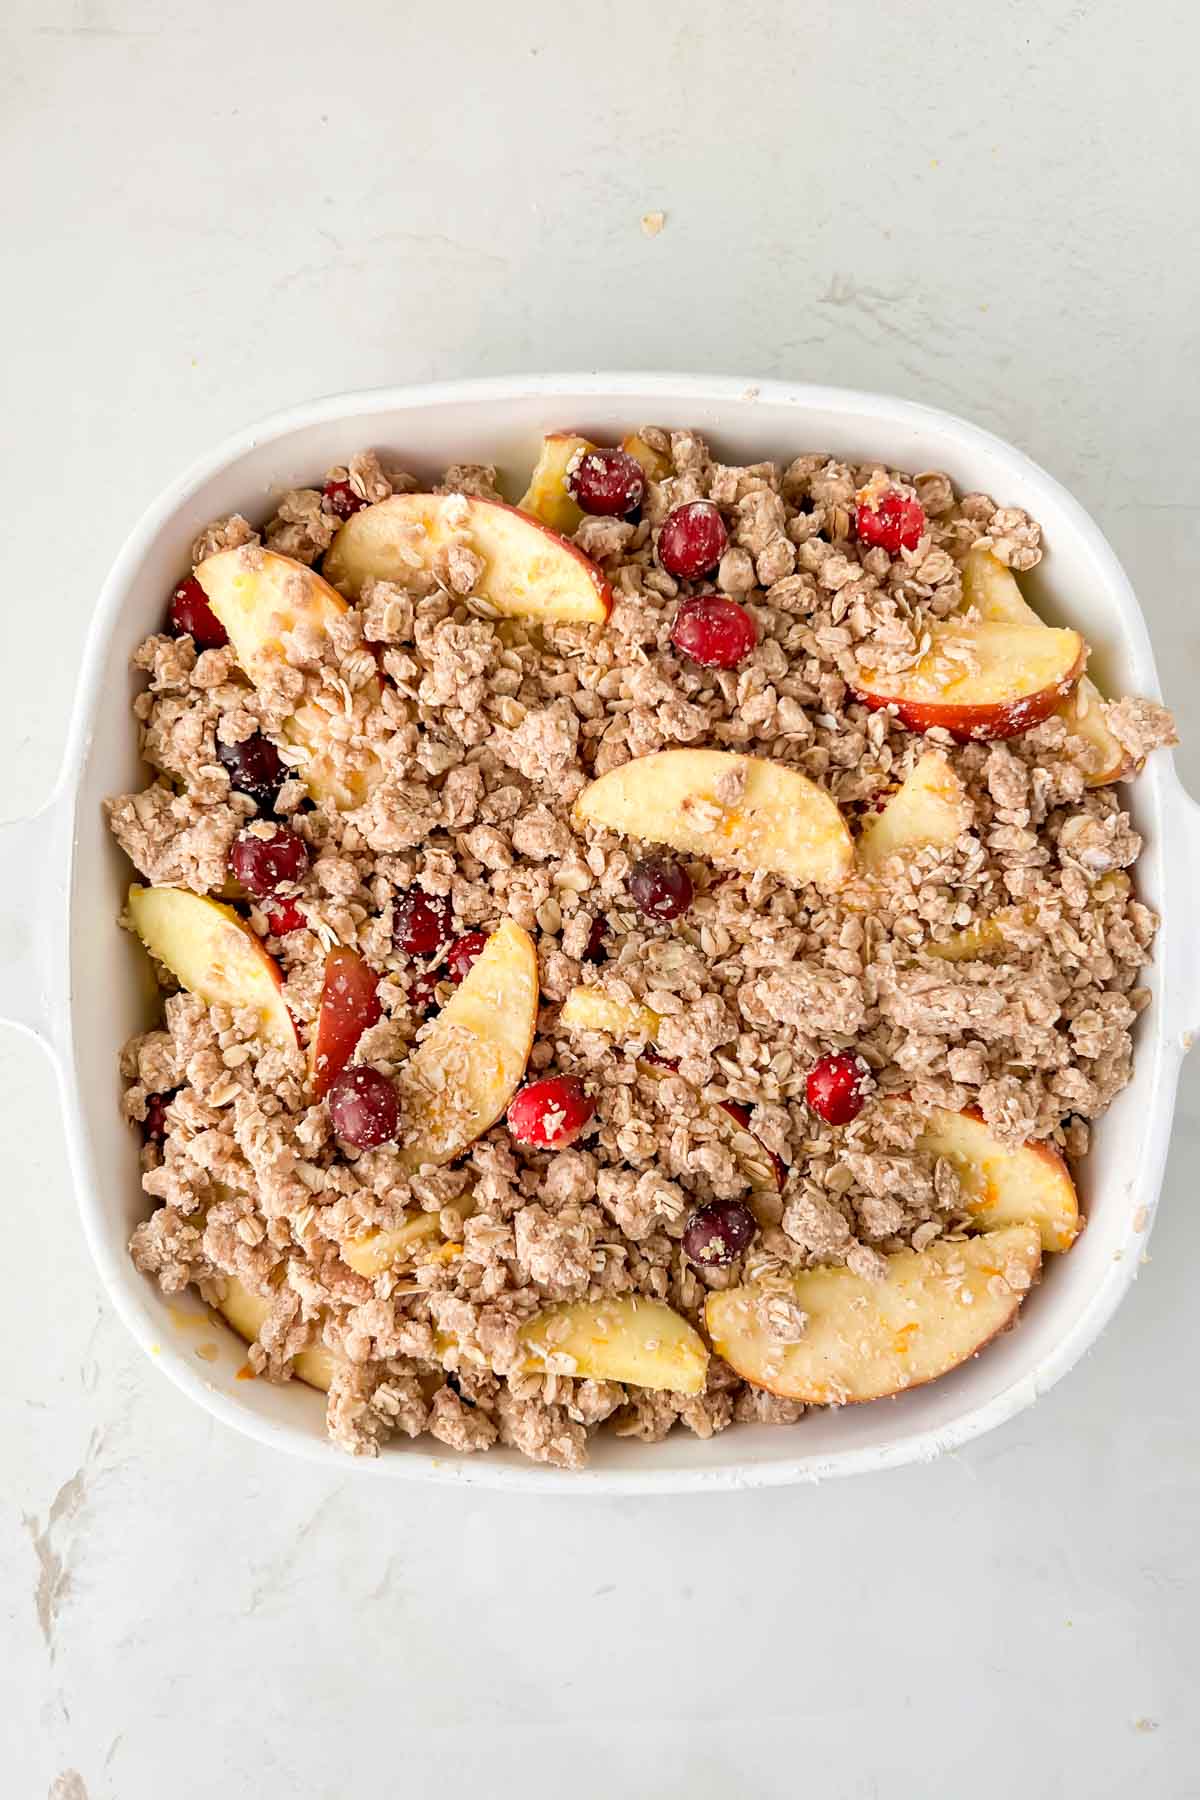 oatmeal streusel topping spread over cranberry and apple mixture before baking. 